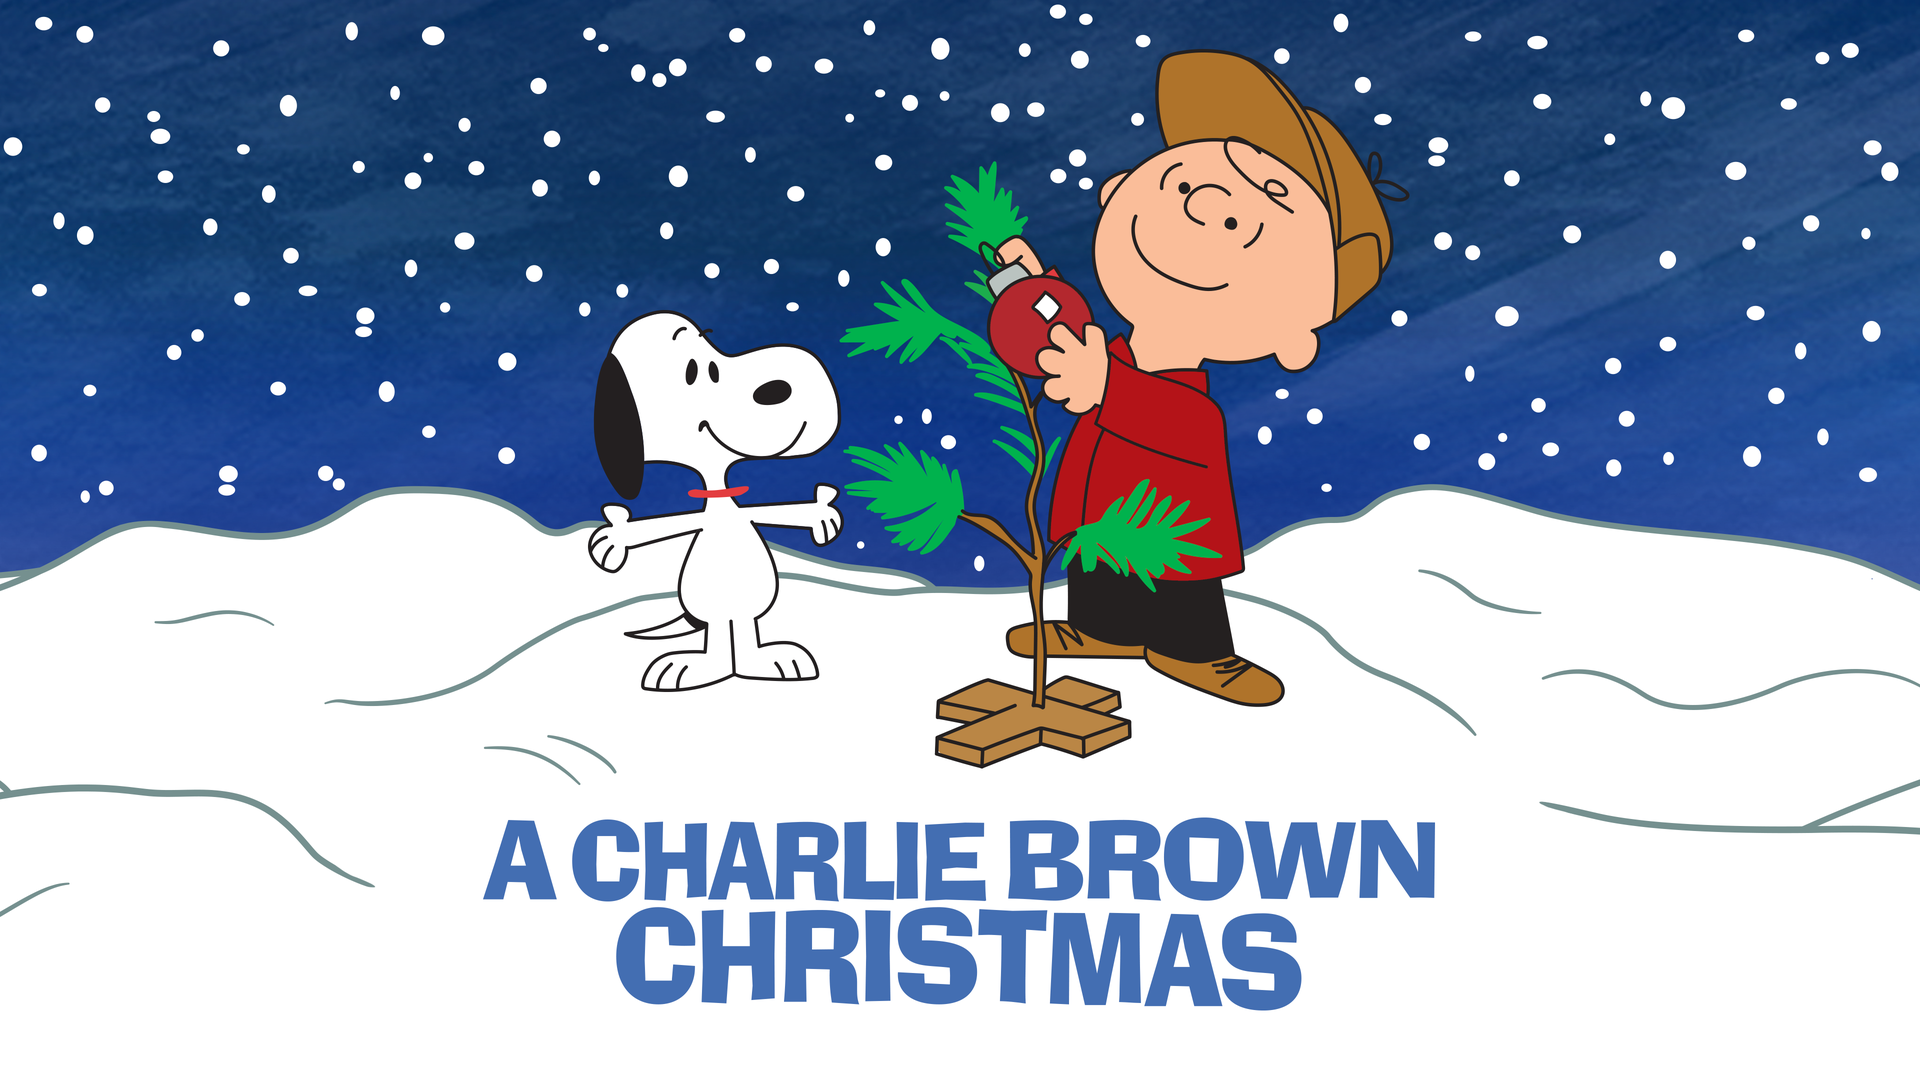 A Charlie Brown Christmas Review